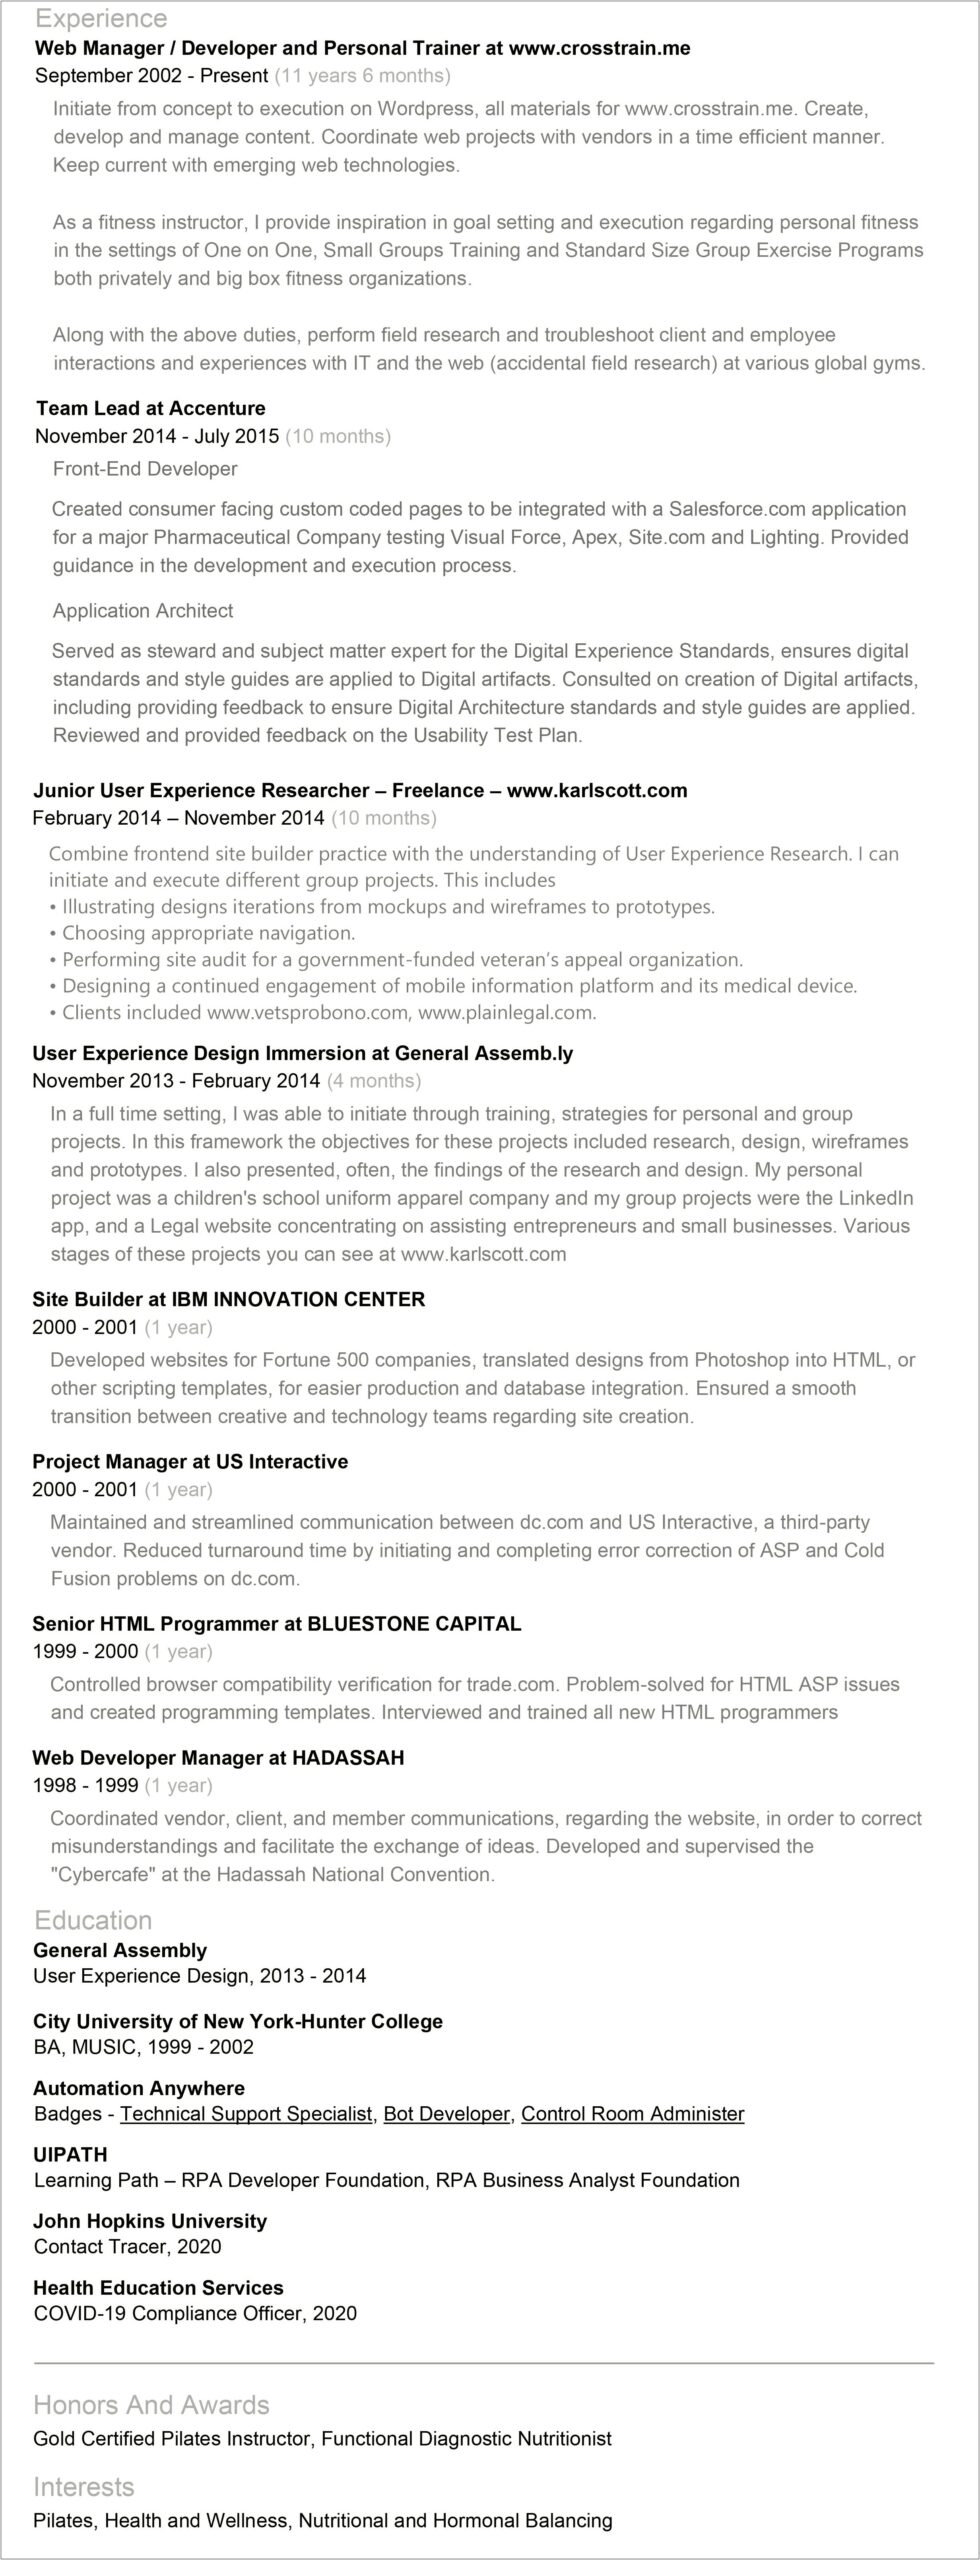 Automation Anywhere 6 Month Experience Resume